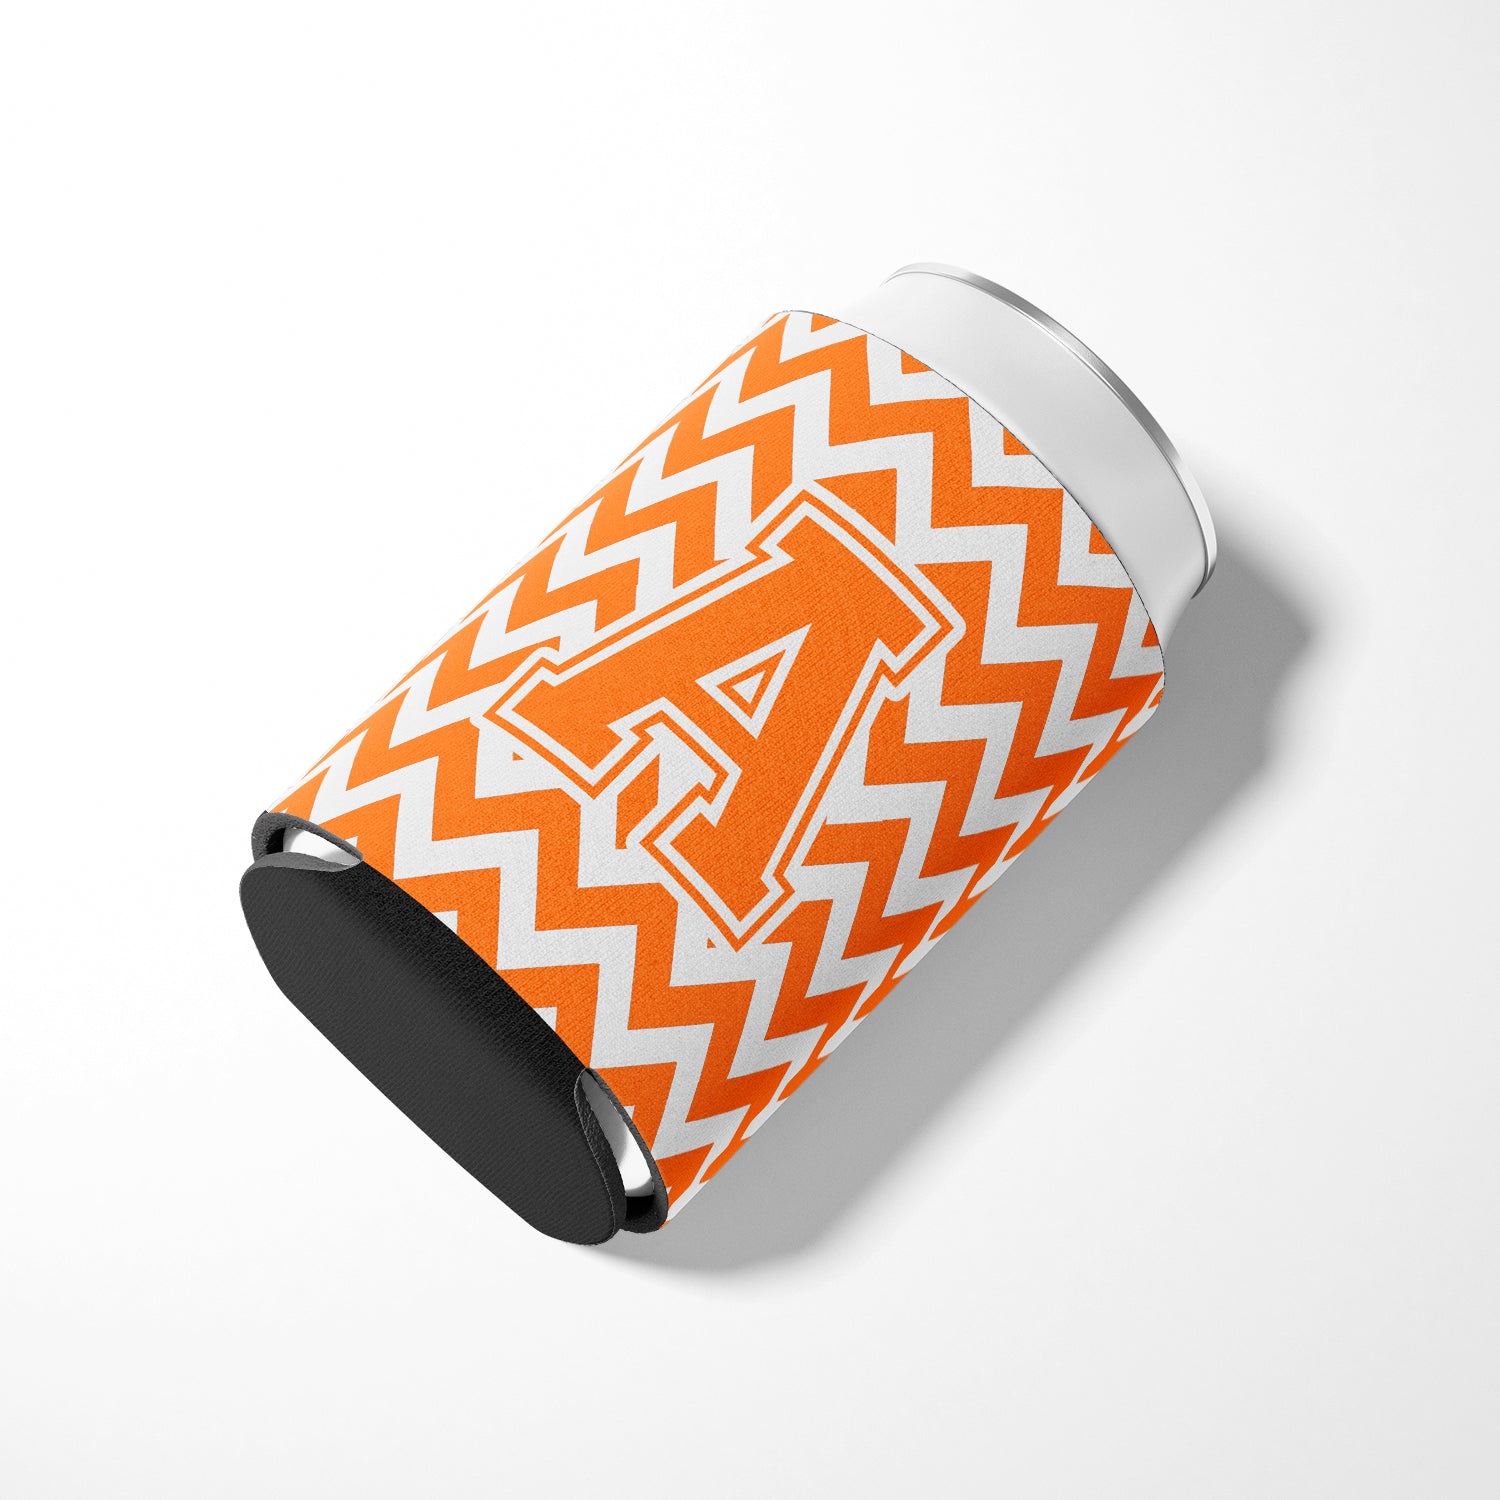 Letter A Chevron Orange and White Can or Bottle Hugger CJ1046-ACC.